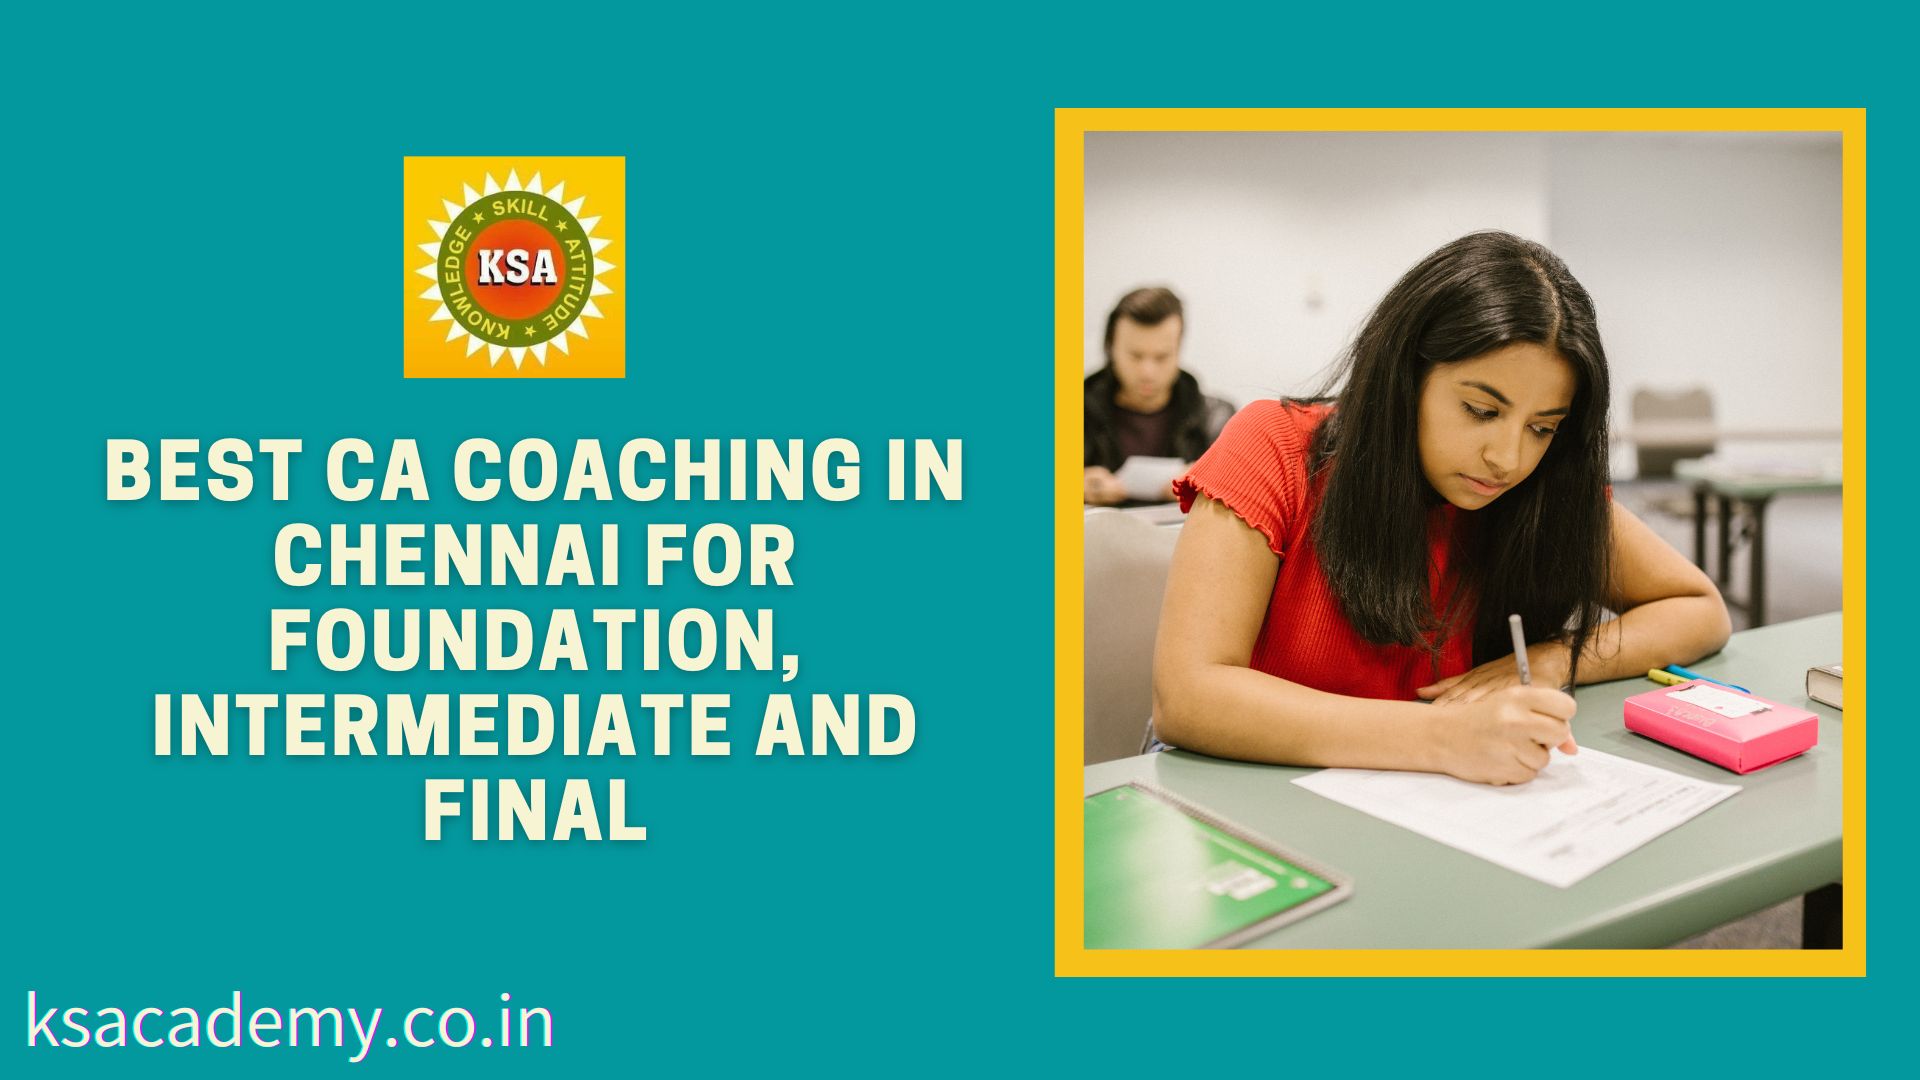 Best CA Coaching in Chennai for Foundation, Intermediate and FinalEducation and LearningCoaching ClassesAll Indiaother